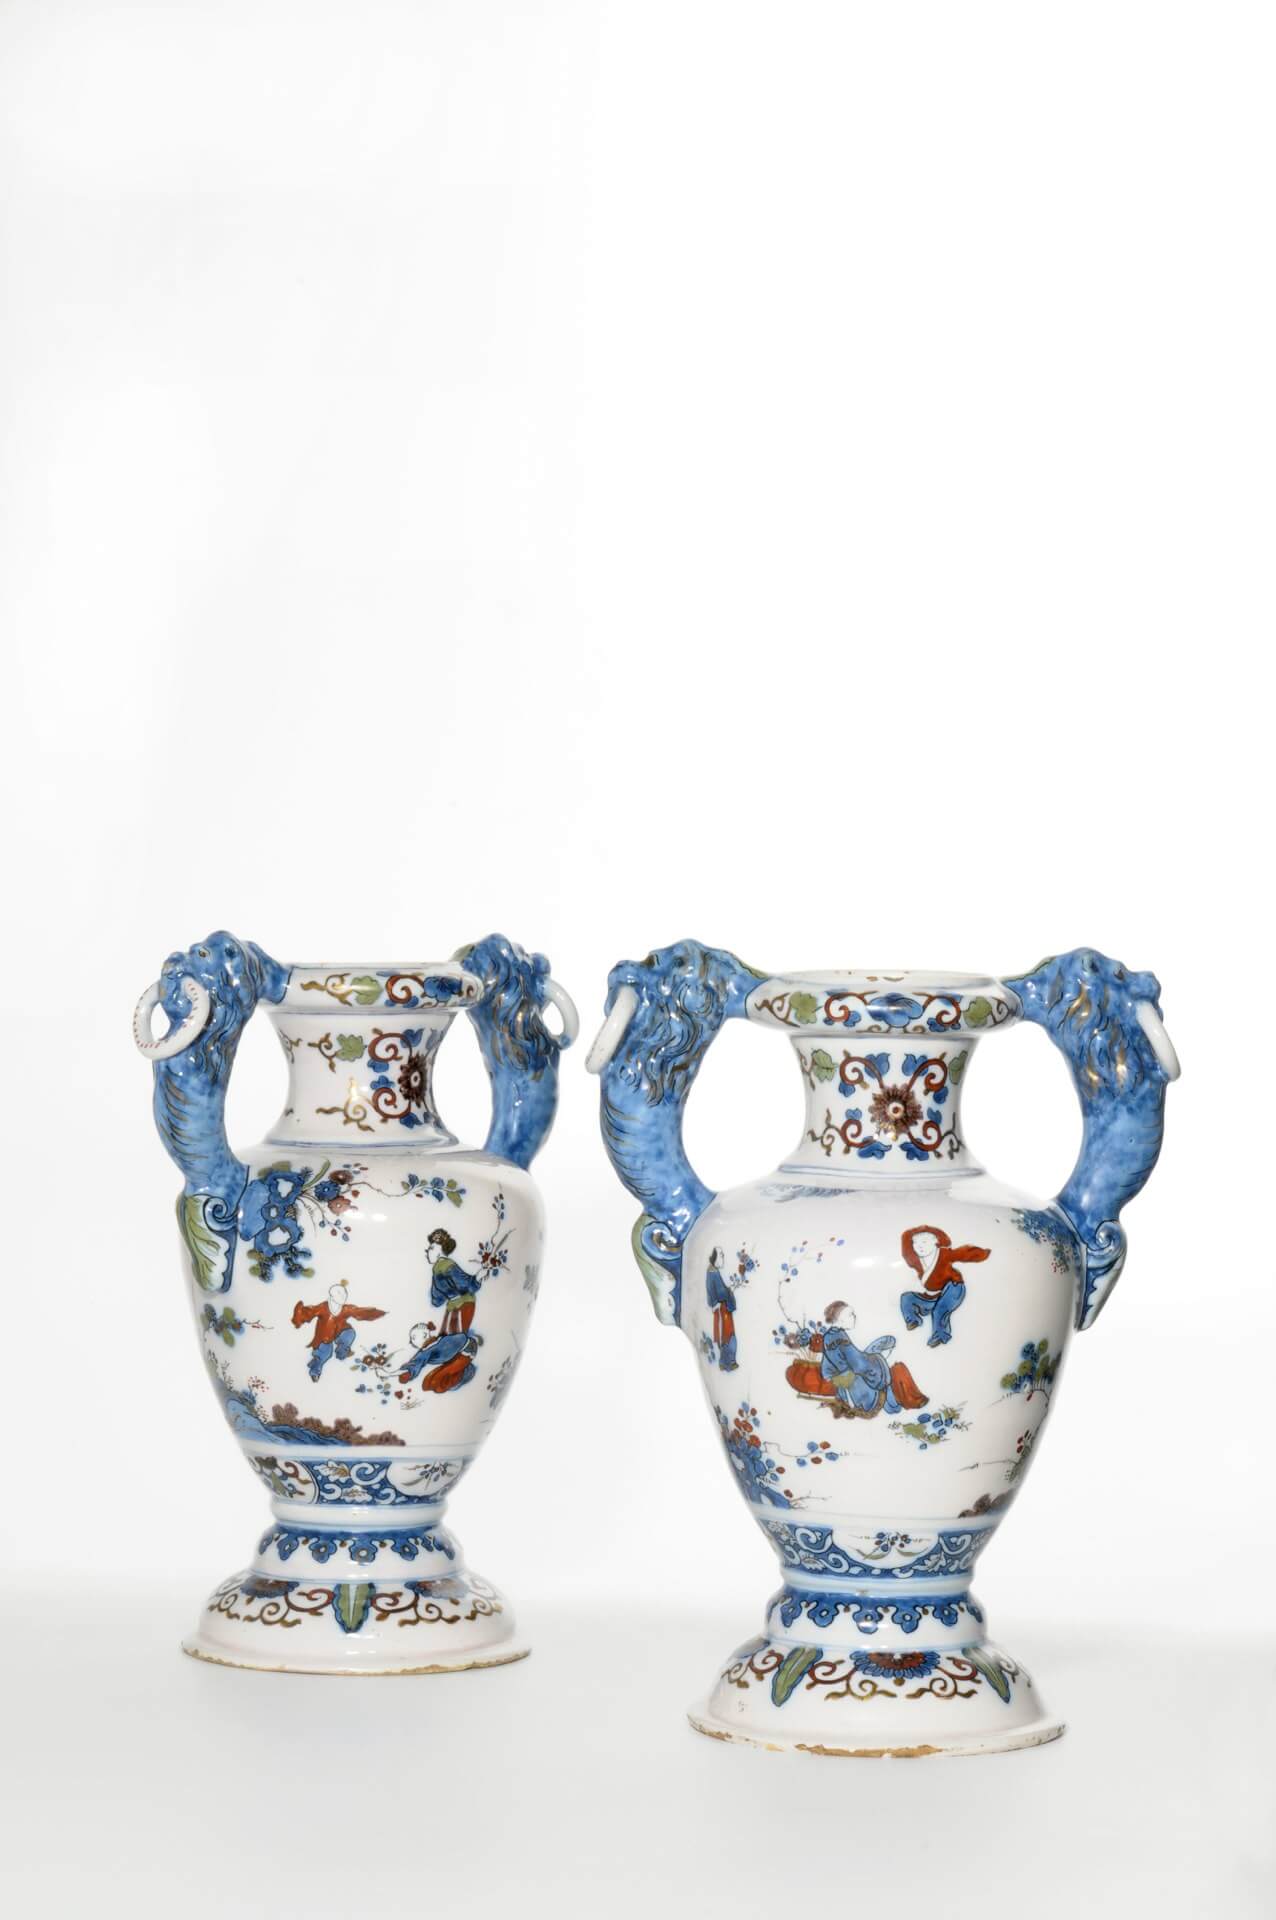 • D1109. Pair of Polychrome and Gilded Chinoiserie Vases